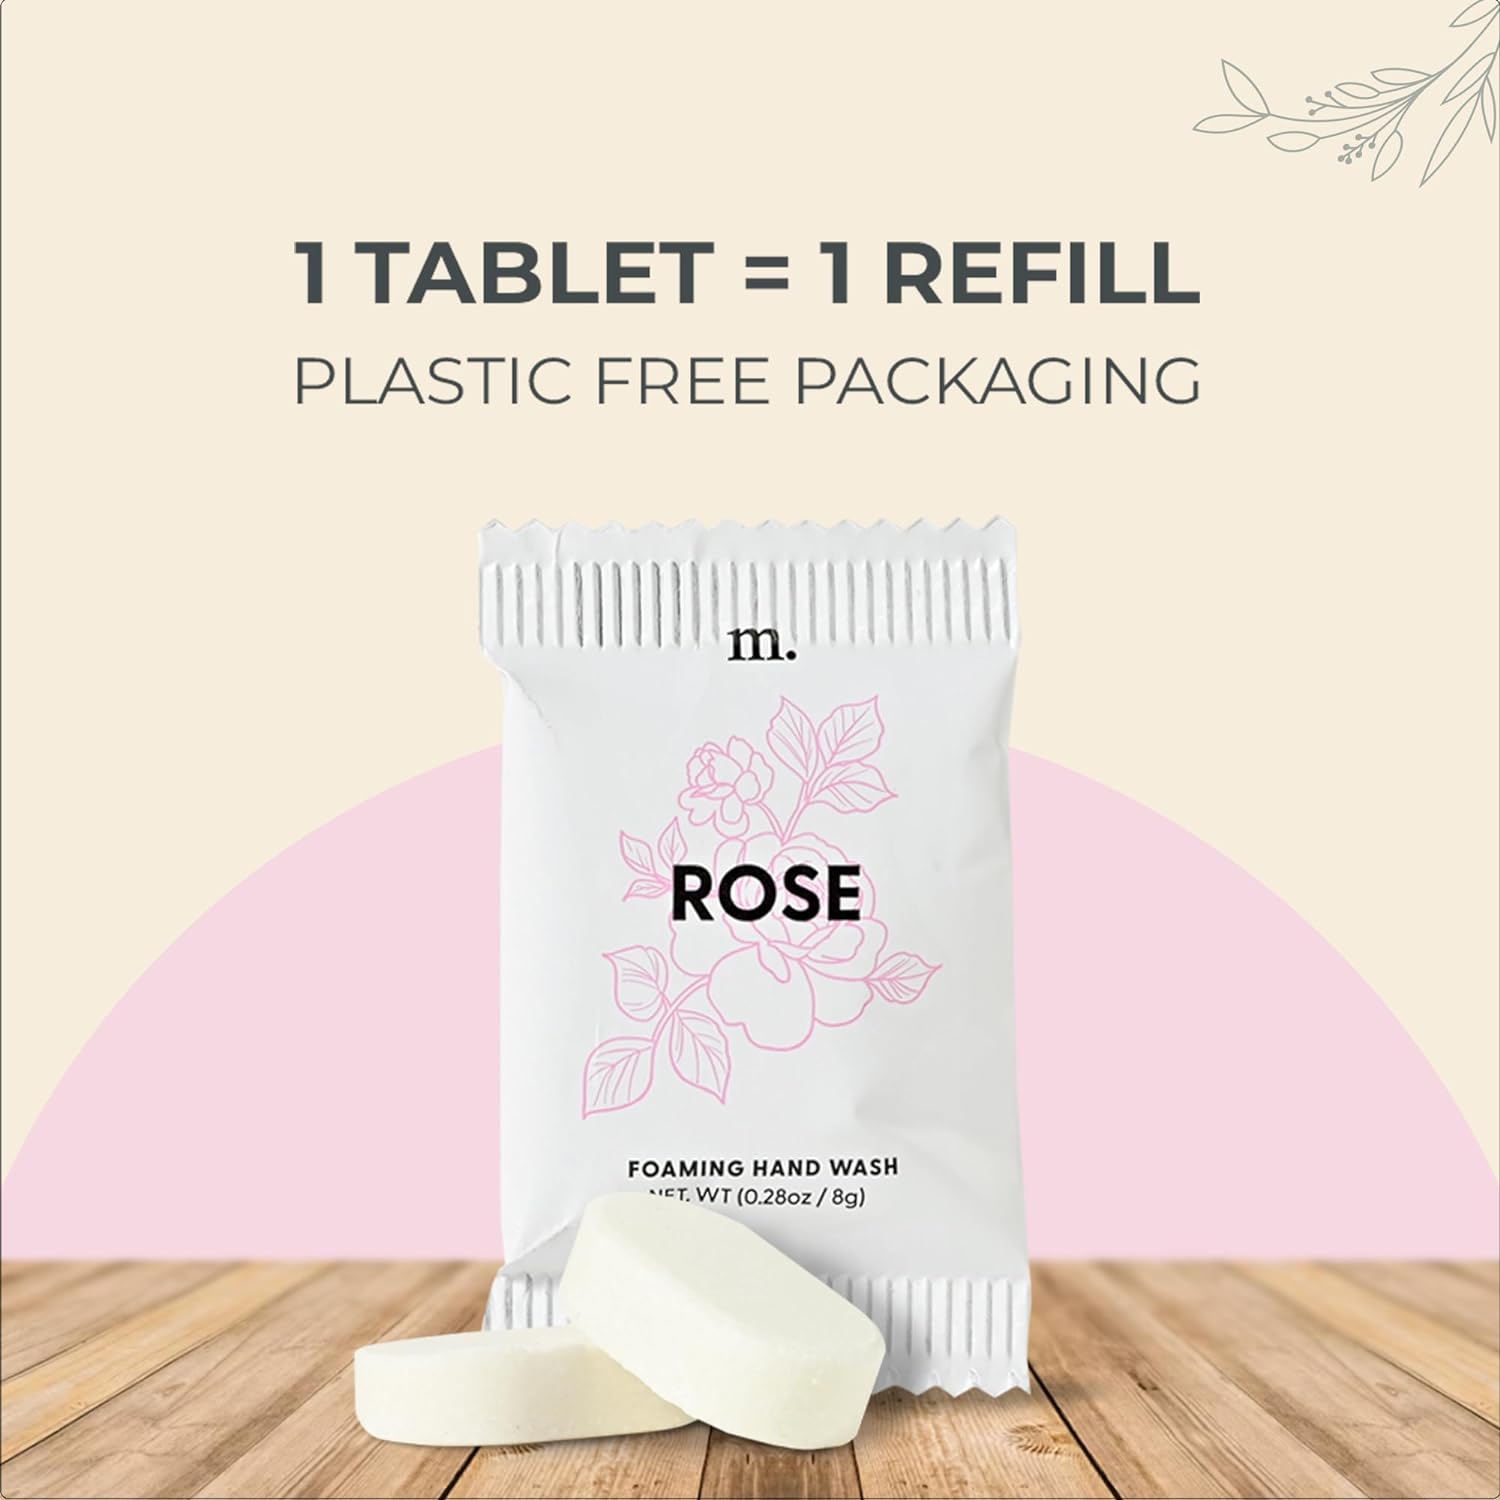 Foaming Hand Soap Tablets Rose x 12